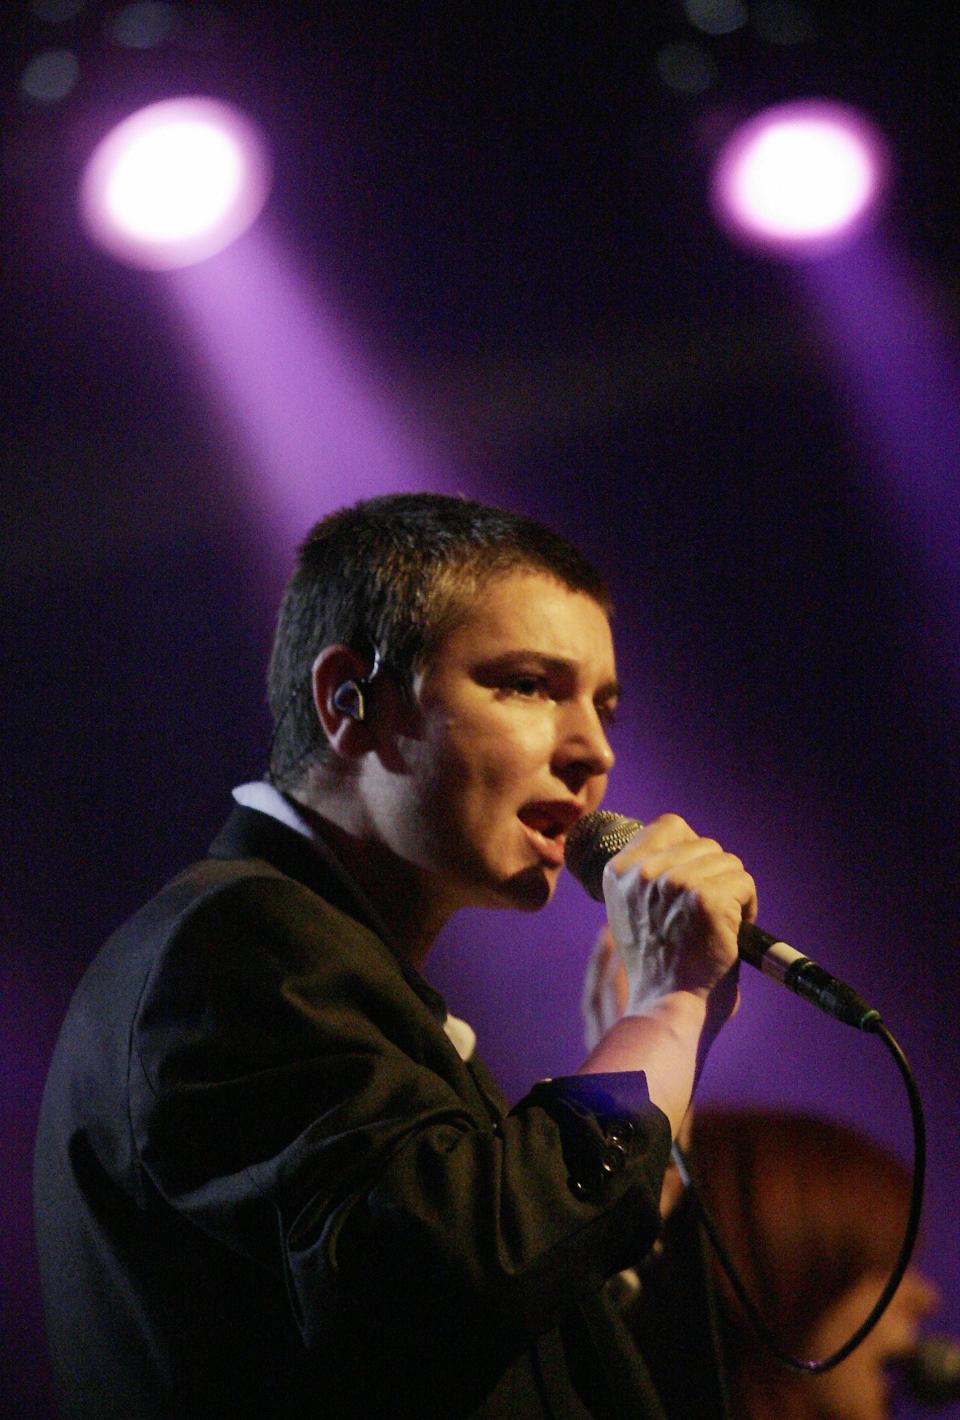 Irish singer Sinead O'Connor performs in 2007 during the Leverkusen Jazz-days in Germany.